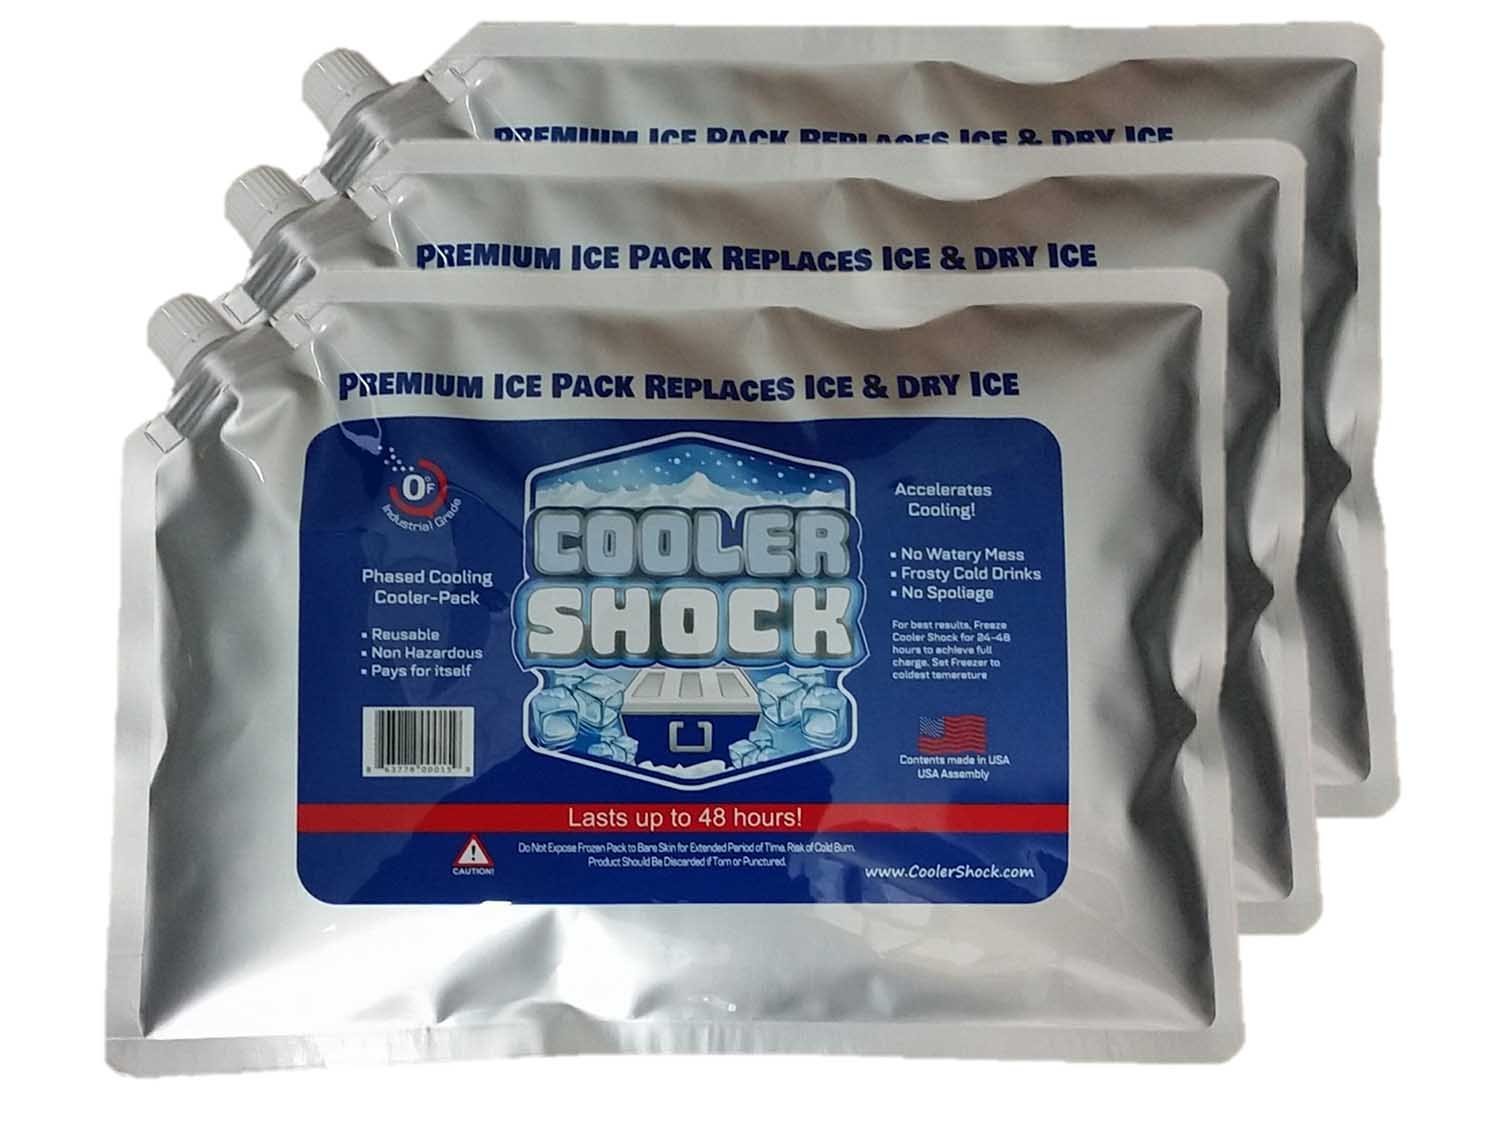 3X Lg. Zero°F Cooler Freeze Packs 10"x14" - No More Ice! Cooler Shock Replaces Ice & is Reusable - You Add Water and Save! - 12 pounds total - Camping, Fishing, Picnics, Boating (13.5 Screw Cap)